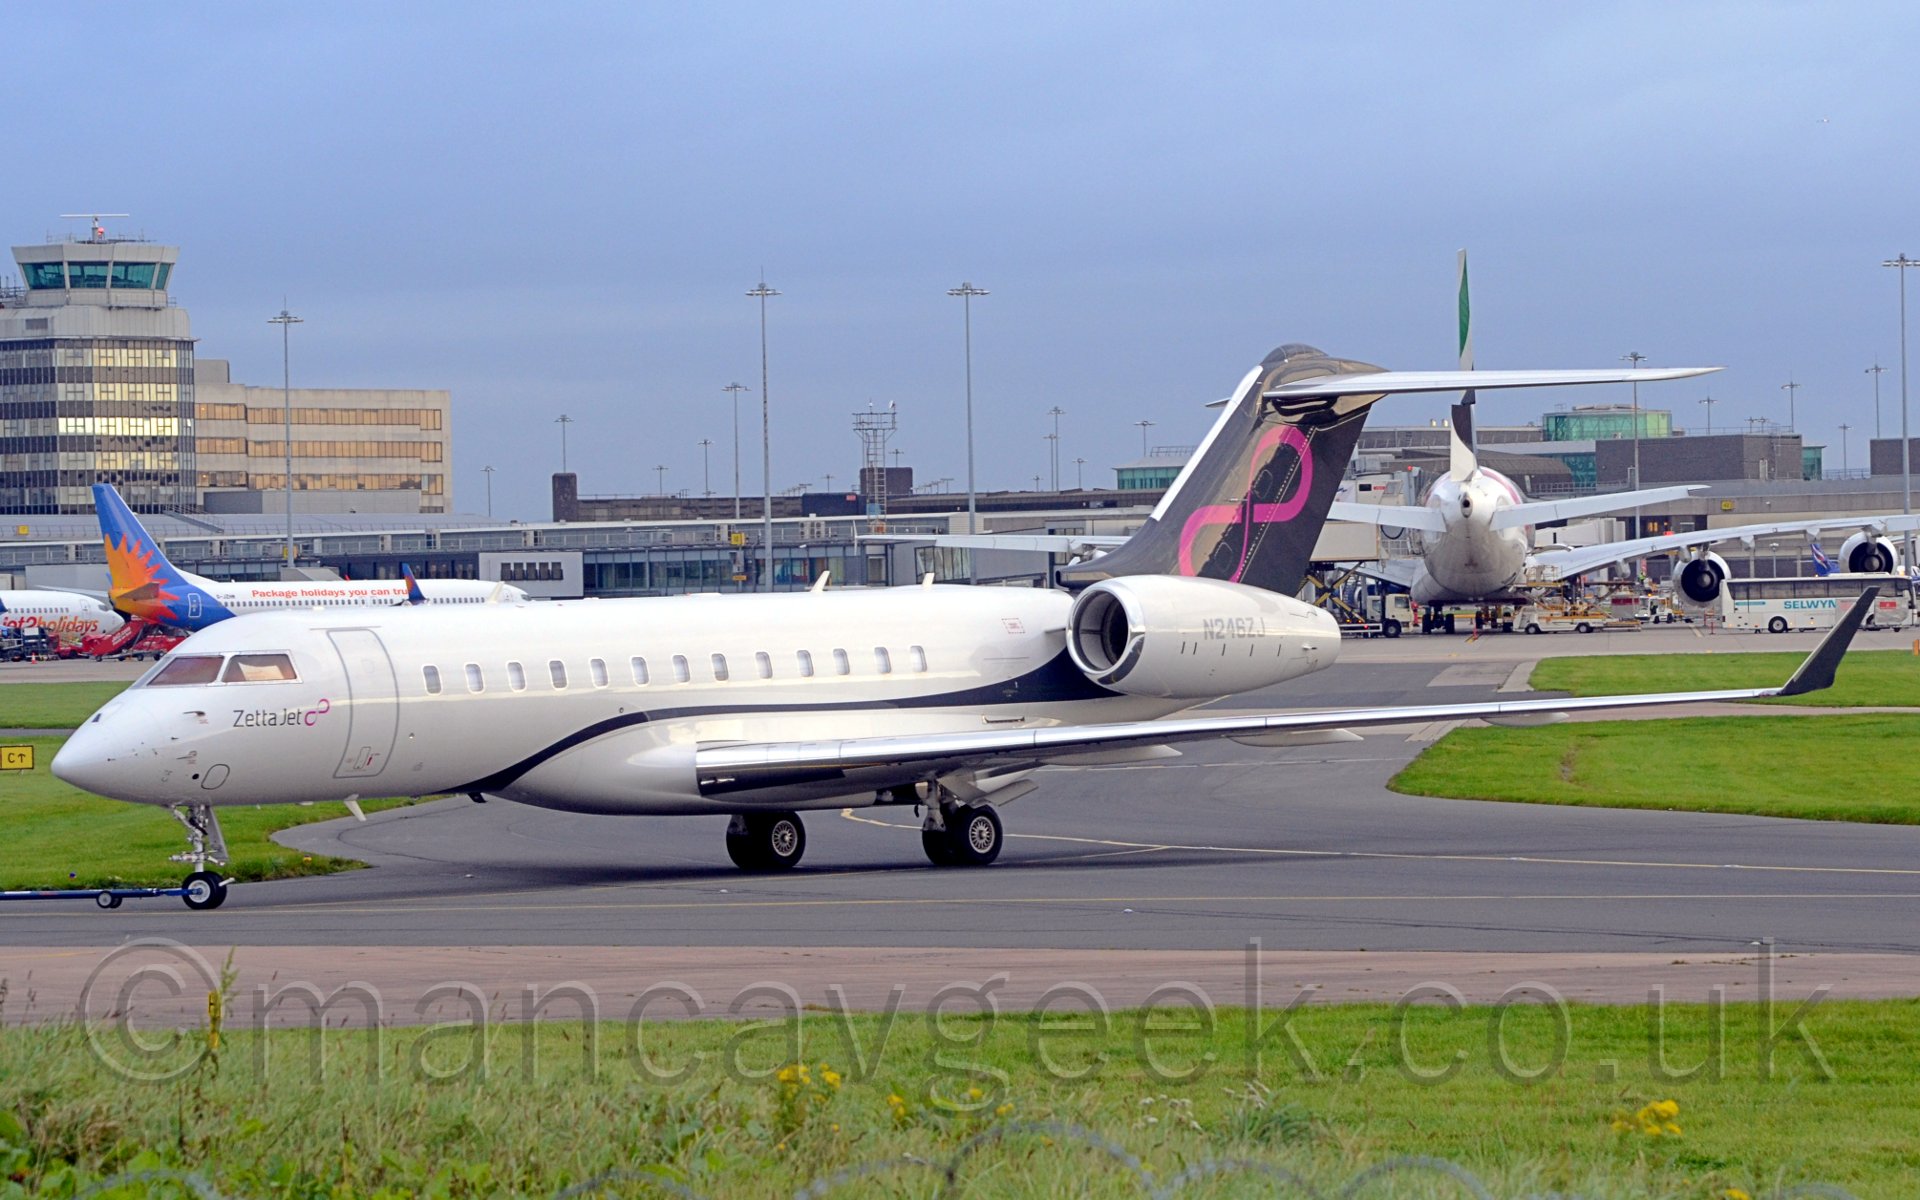 Side view of a large twin engined bizjet facing to the left. The plane is mostly white, with a blue stripe sweeping from below the fuselage just in front of the wing, over the wing, and sweeping upo to cover the entire tail, where there is a large pink infinity symbol. There are small "Zetta Jet" titles along with a small pink infinity symbol on the planes nose, just under the cockpit windows. There is a strip of green grass with wild flowers in the foreground, with more patches of grasson the right and left of the plane in the near background. Further back, there are larger planes parked iun front of a terminal building, with a large building including the control tower on the left of frame. Behind it all, the sky is a pale hazy blue.